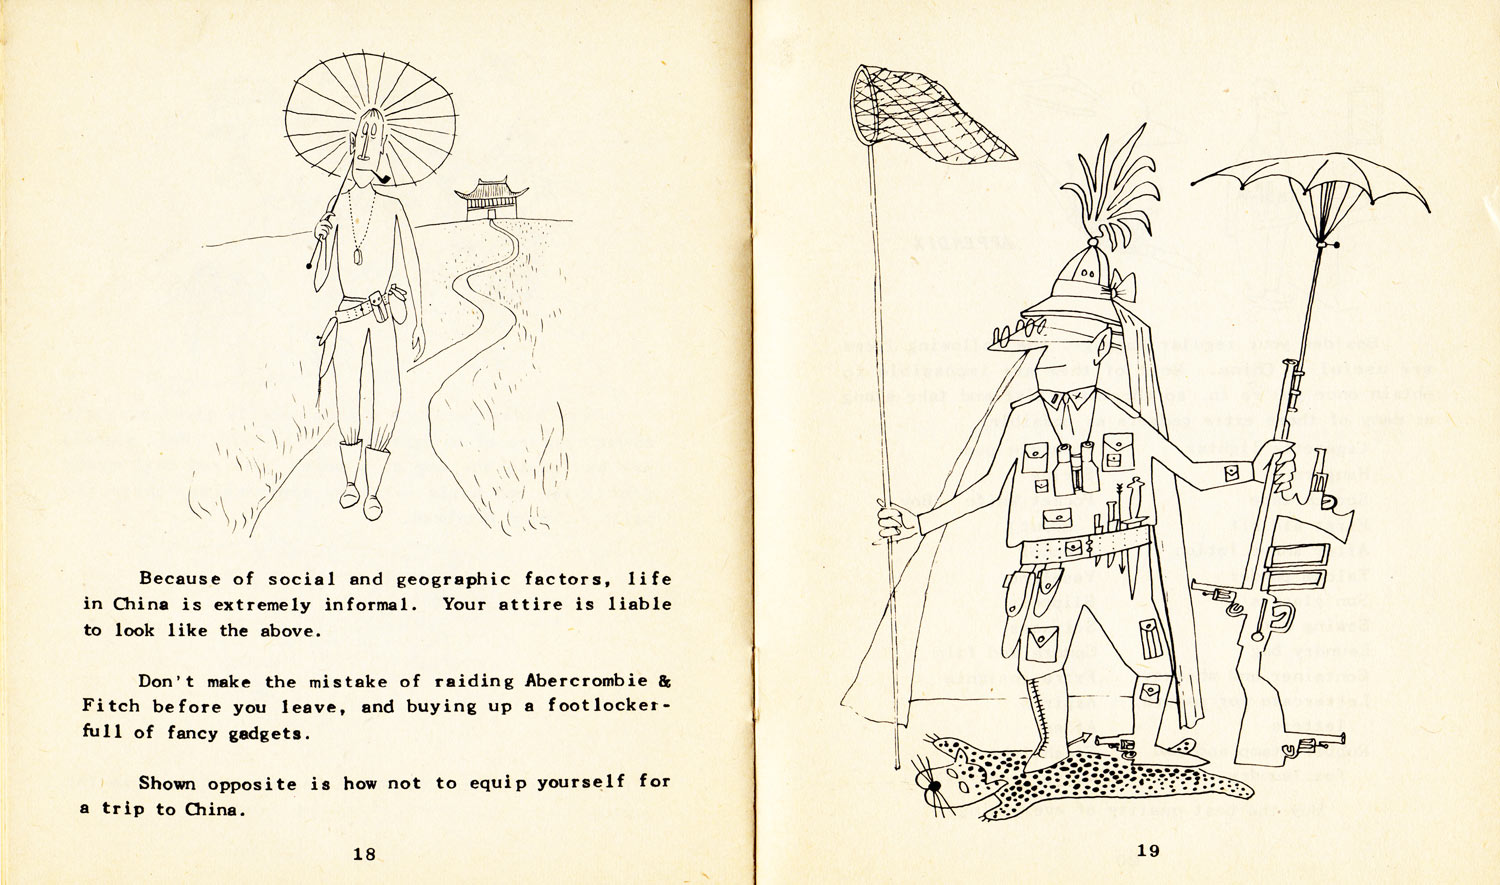 Pp. 18-19 of China Theater: An Informal Notebook of Useful Information for Military Men in China. Produced by the Reproduction Branch of the OSS, probably 1945. The Saul Steinberg Foundation.